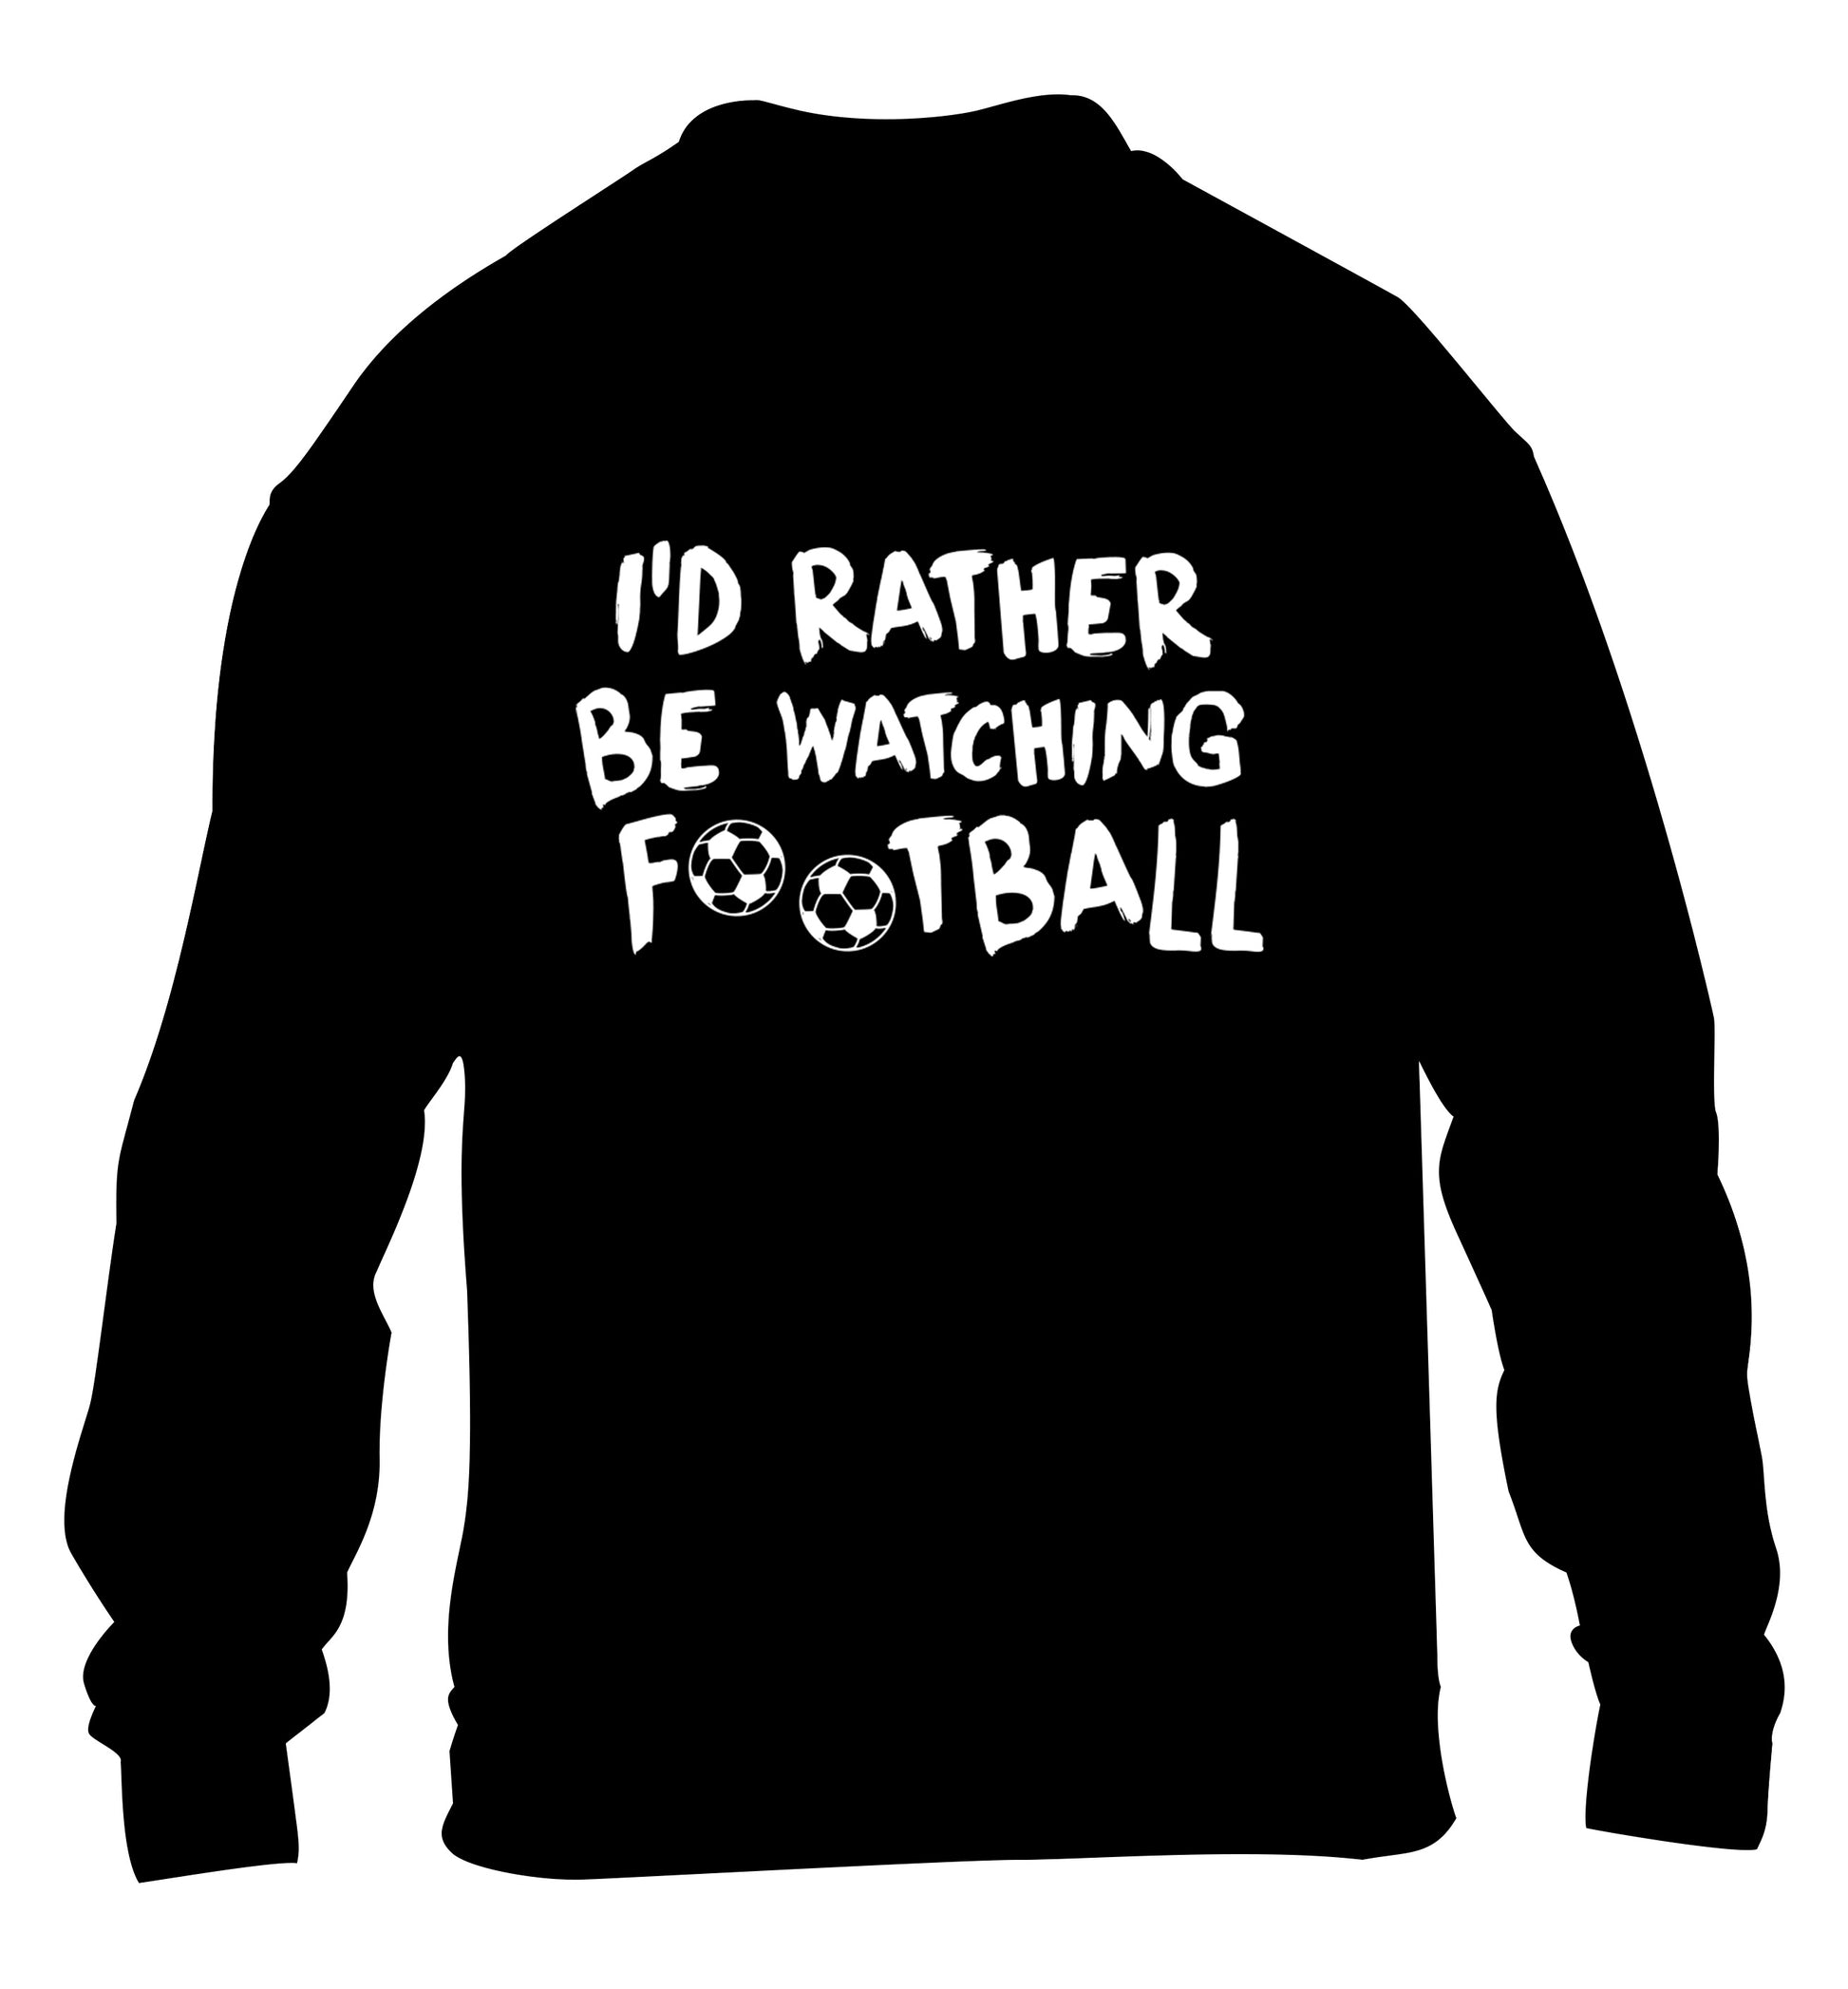 I'd rather be watching football children's black sweater 12-14 Years